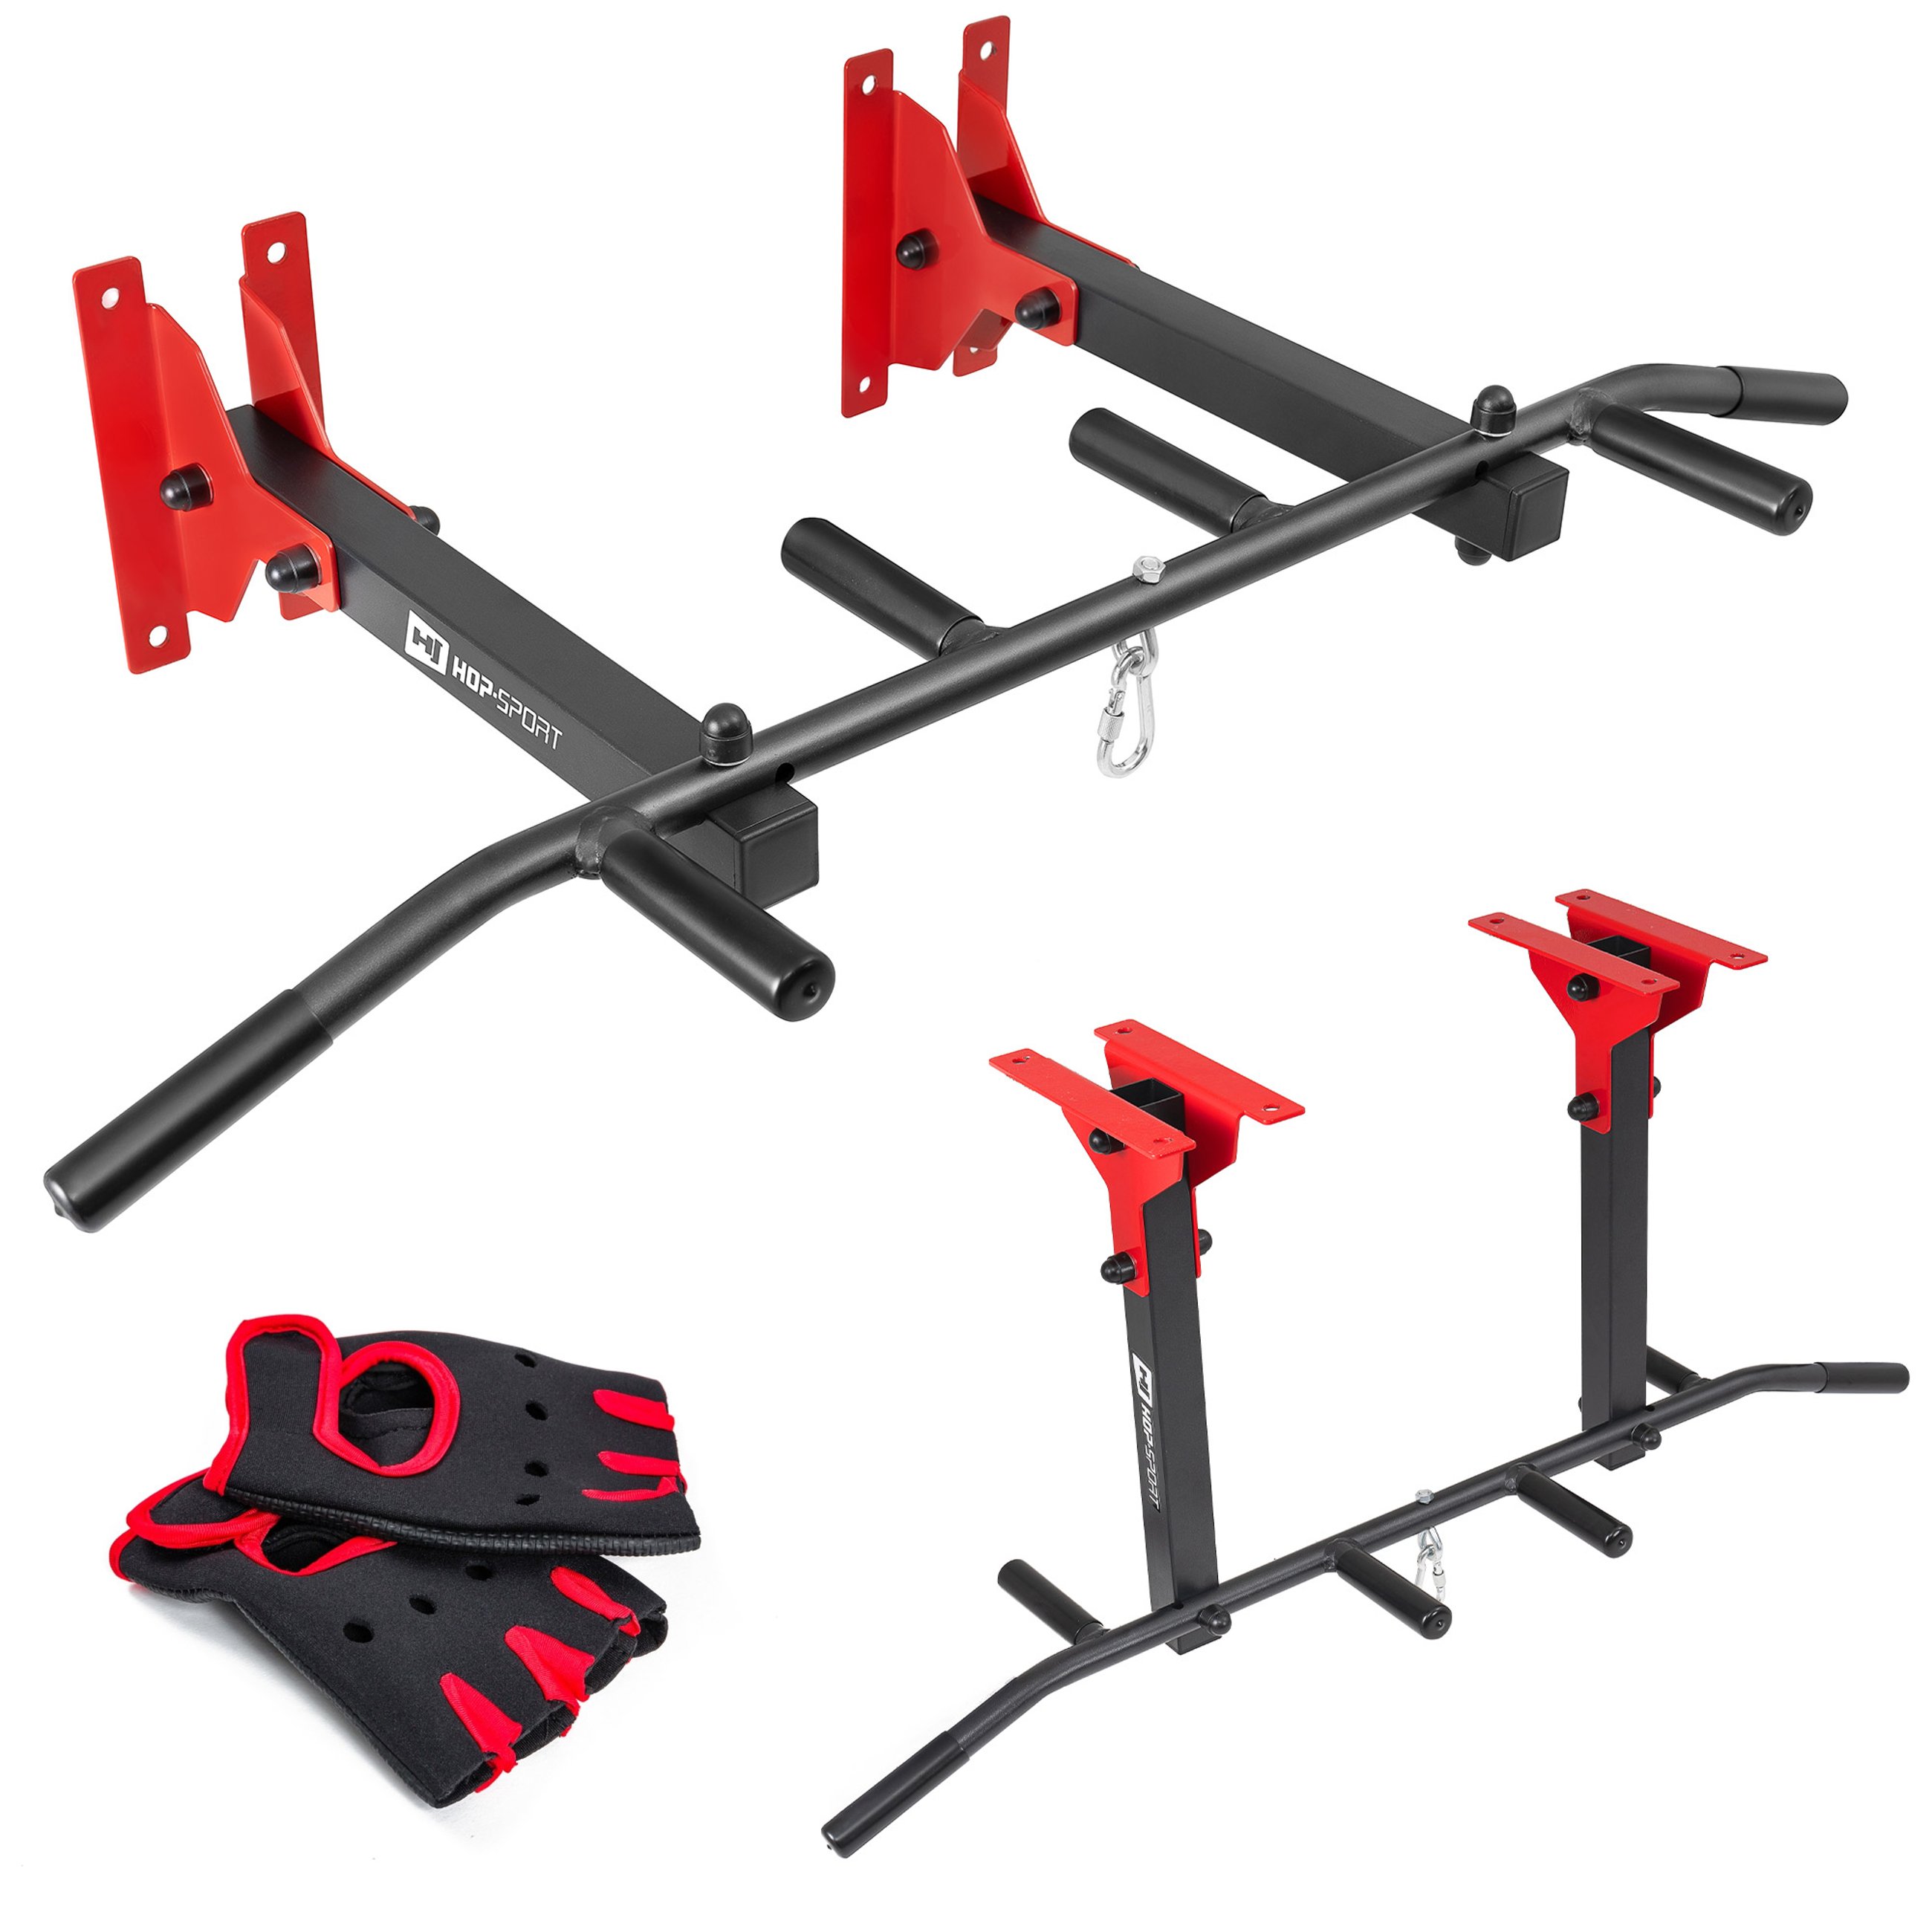 Ceiling & Wall Mounted Pull Up Bar HS-2006K w/ Gym Gloves